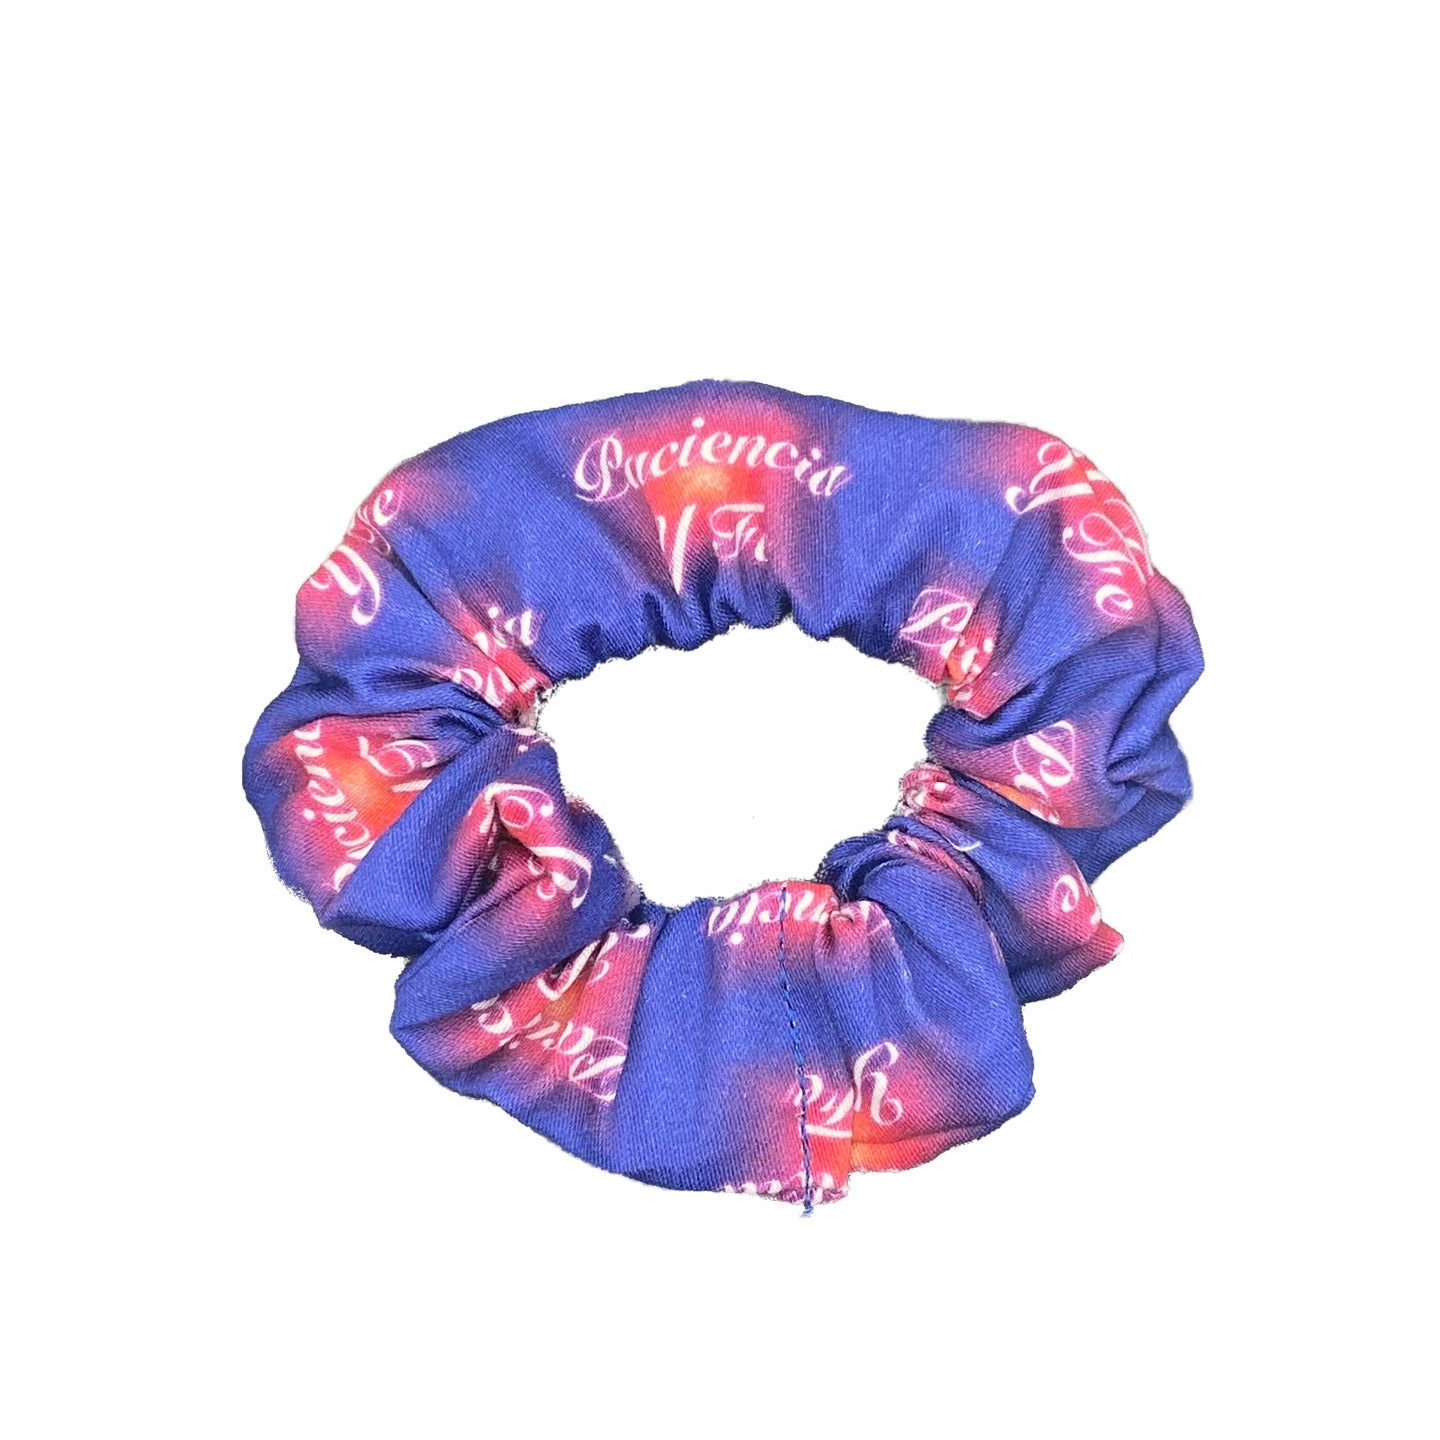 Paciencia Y Fe Scrunchie - Inspired by the In The Heights Movie